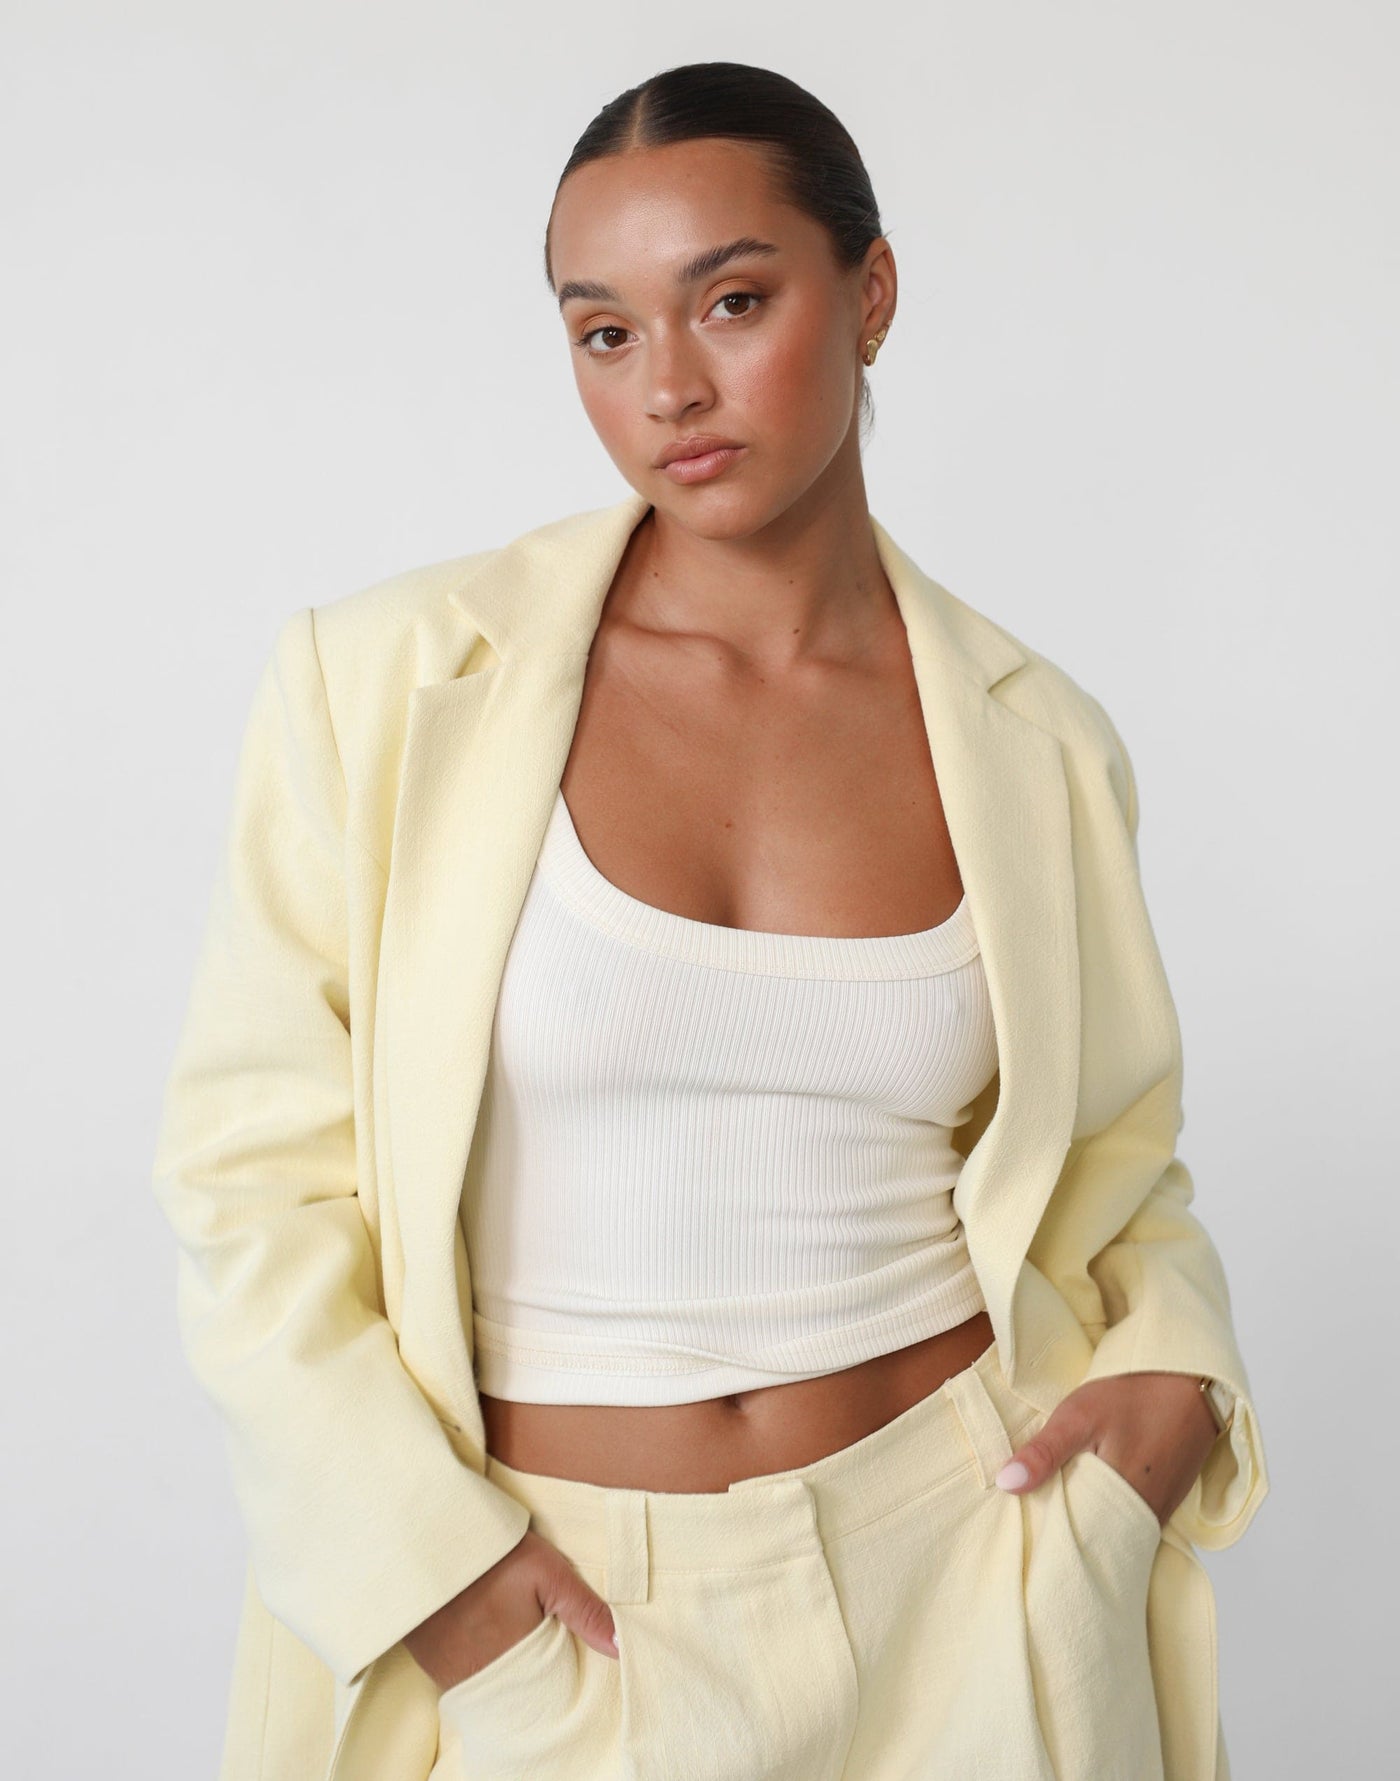 Leo Blazer (Butter) - By Lioness - Oversized Lined Linen Blazer - Women's Top - Charcoal Clothing